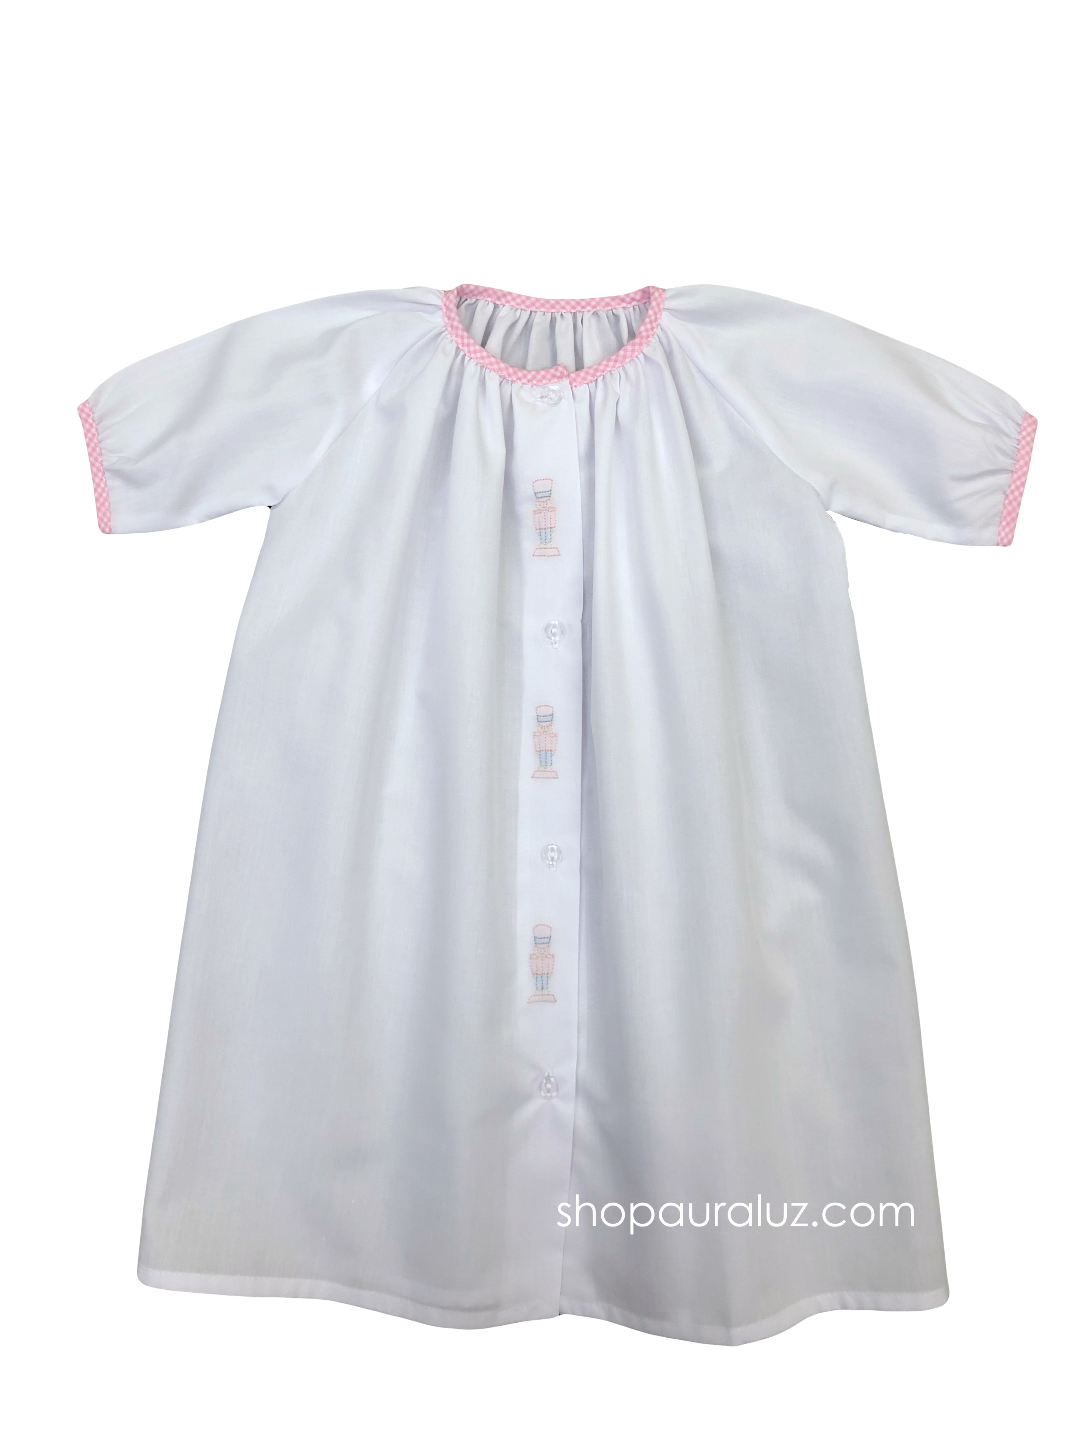 Auraluz Day Gown. White with pink check trim and embroidered soldiers